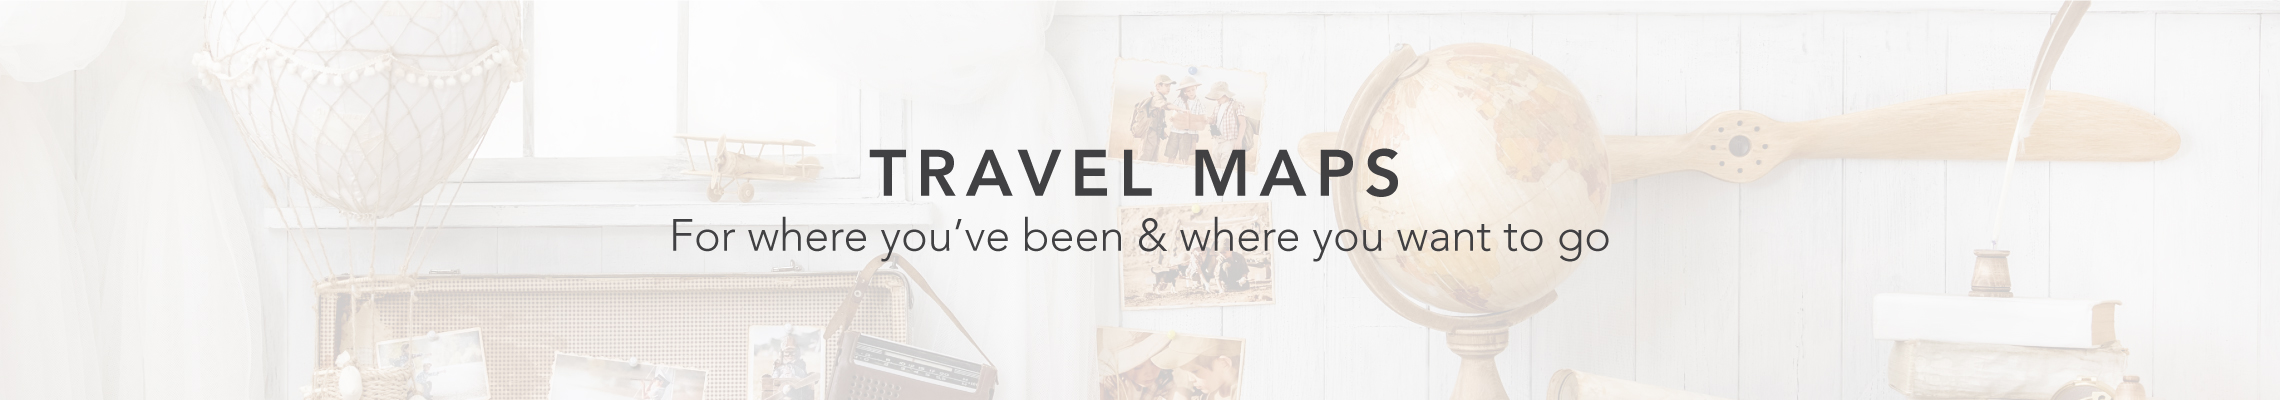 New Travel Maps now available!